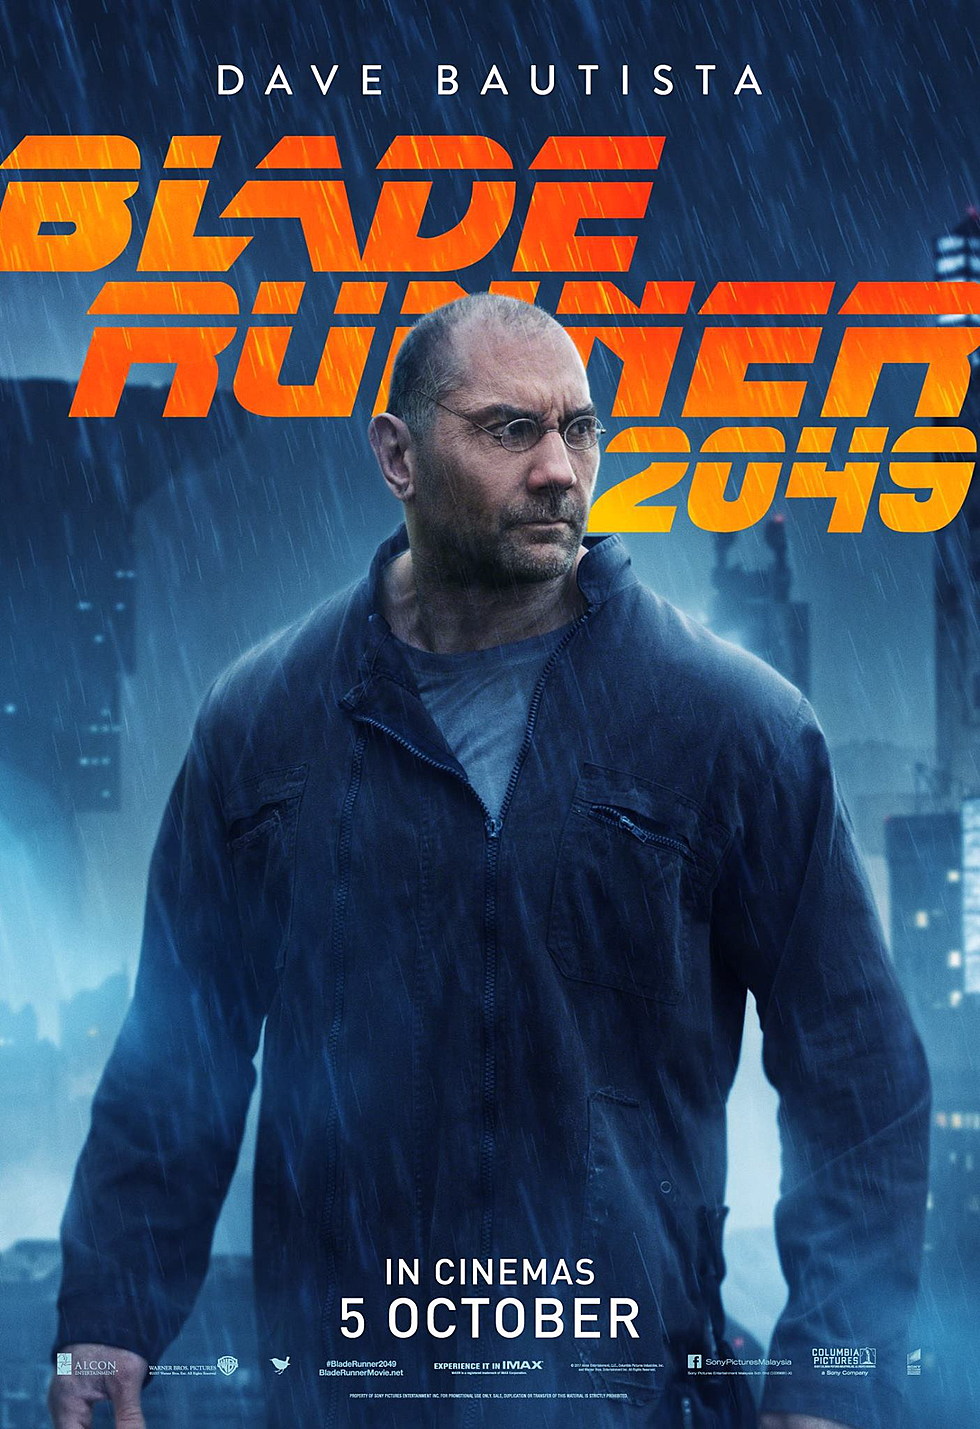 Blade Runner 2049 International Posters Give A Good Look At The Main Cast